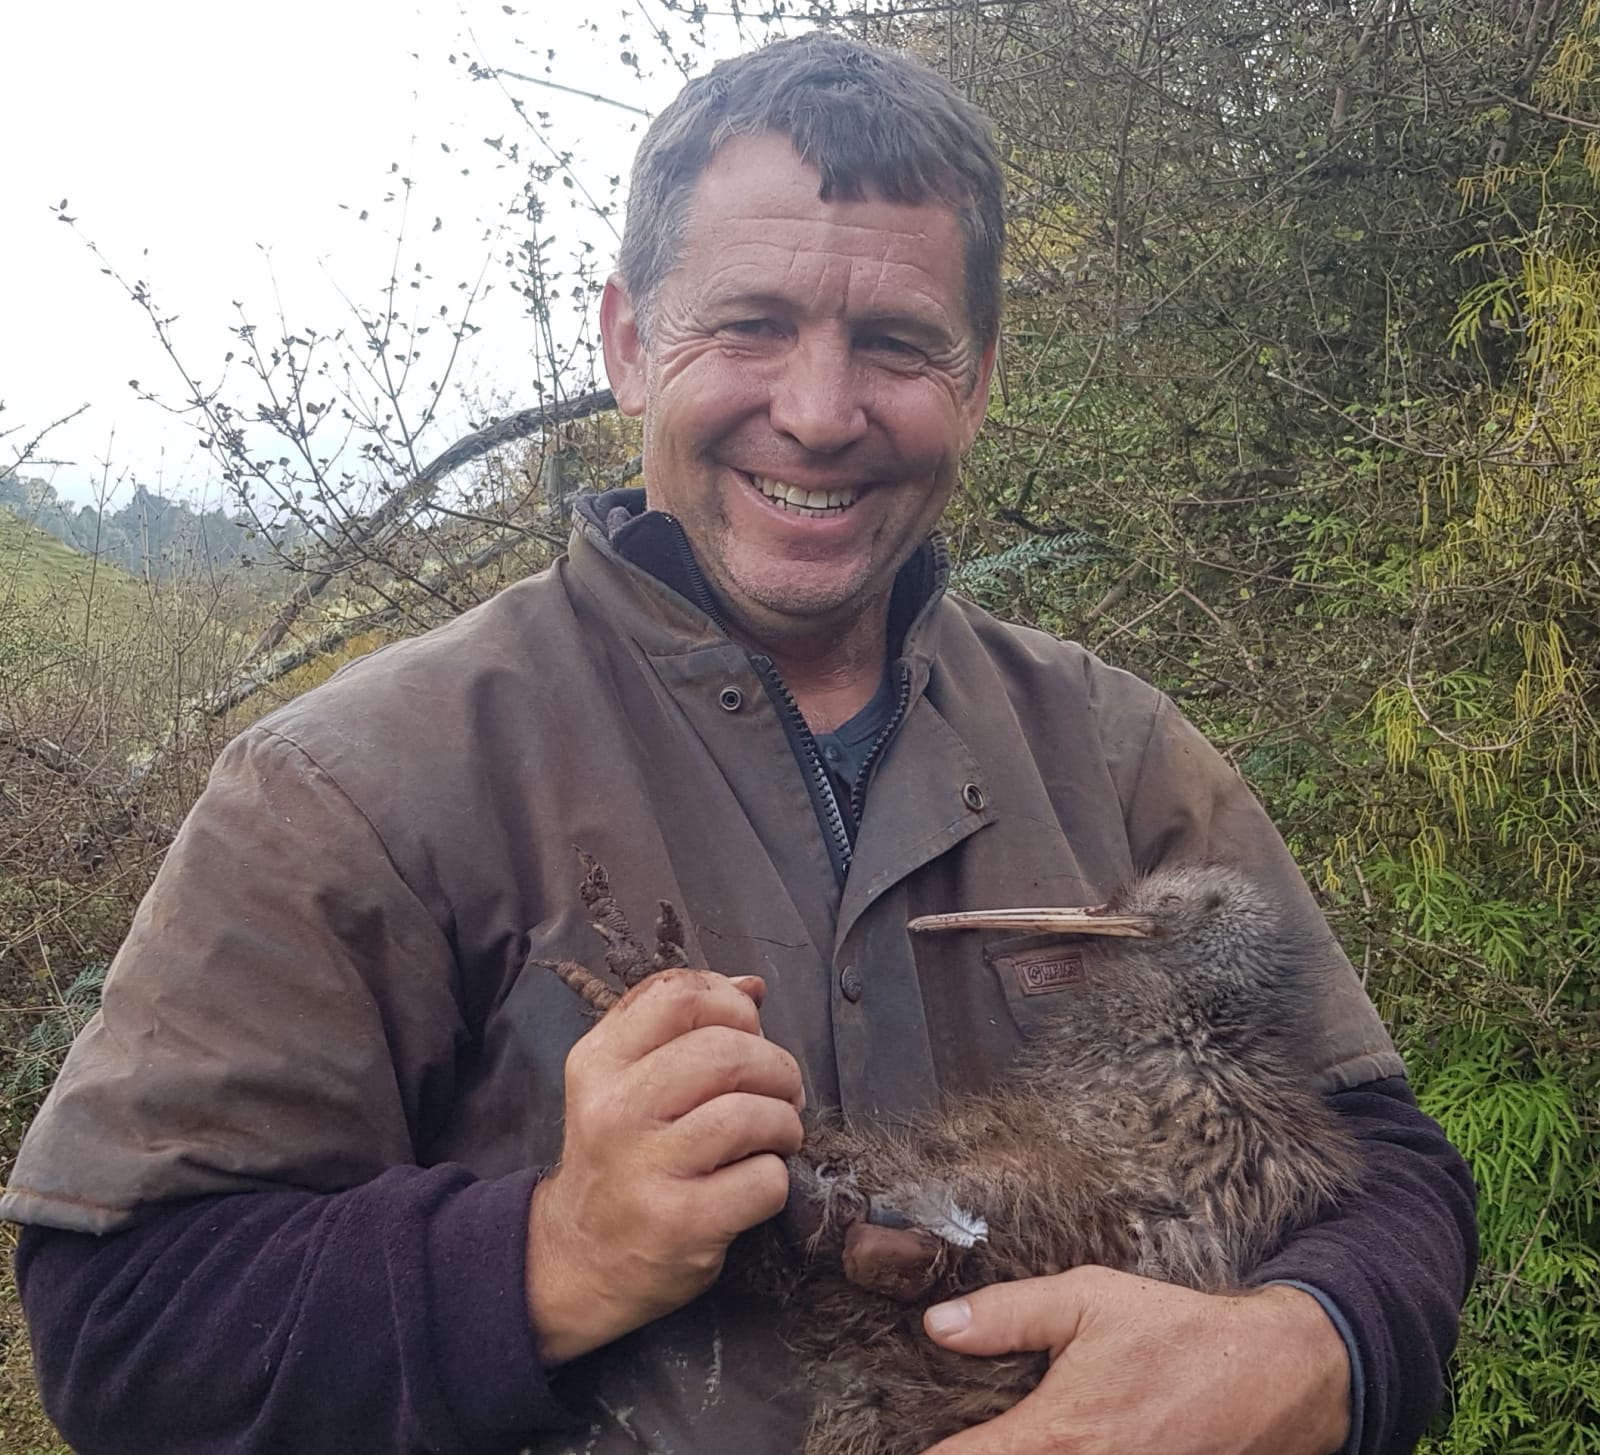 Reserve manager cuddling a wounded Kiwi Bird